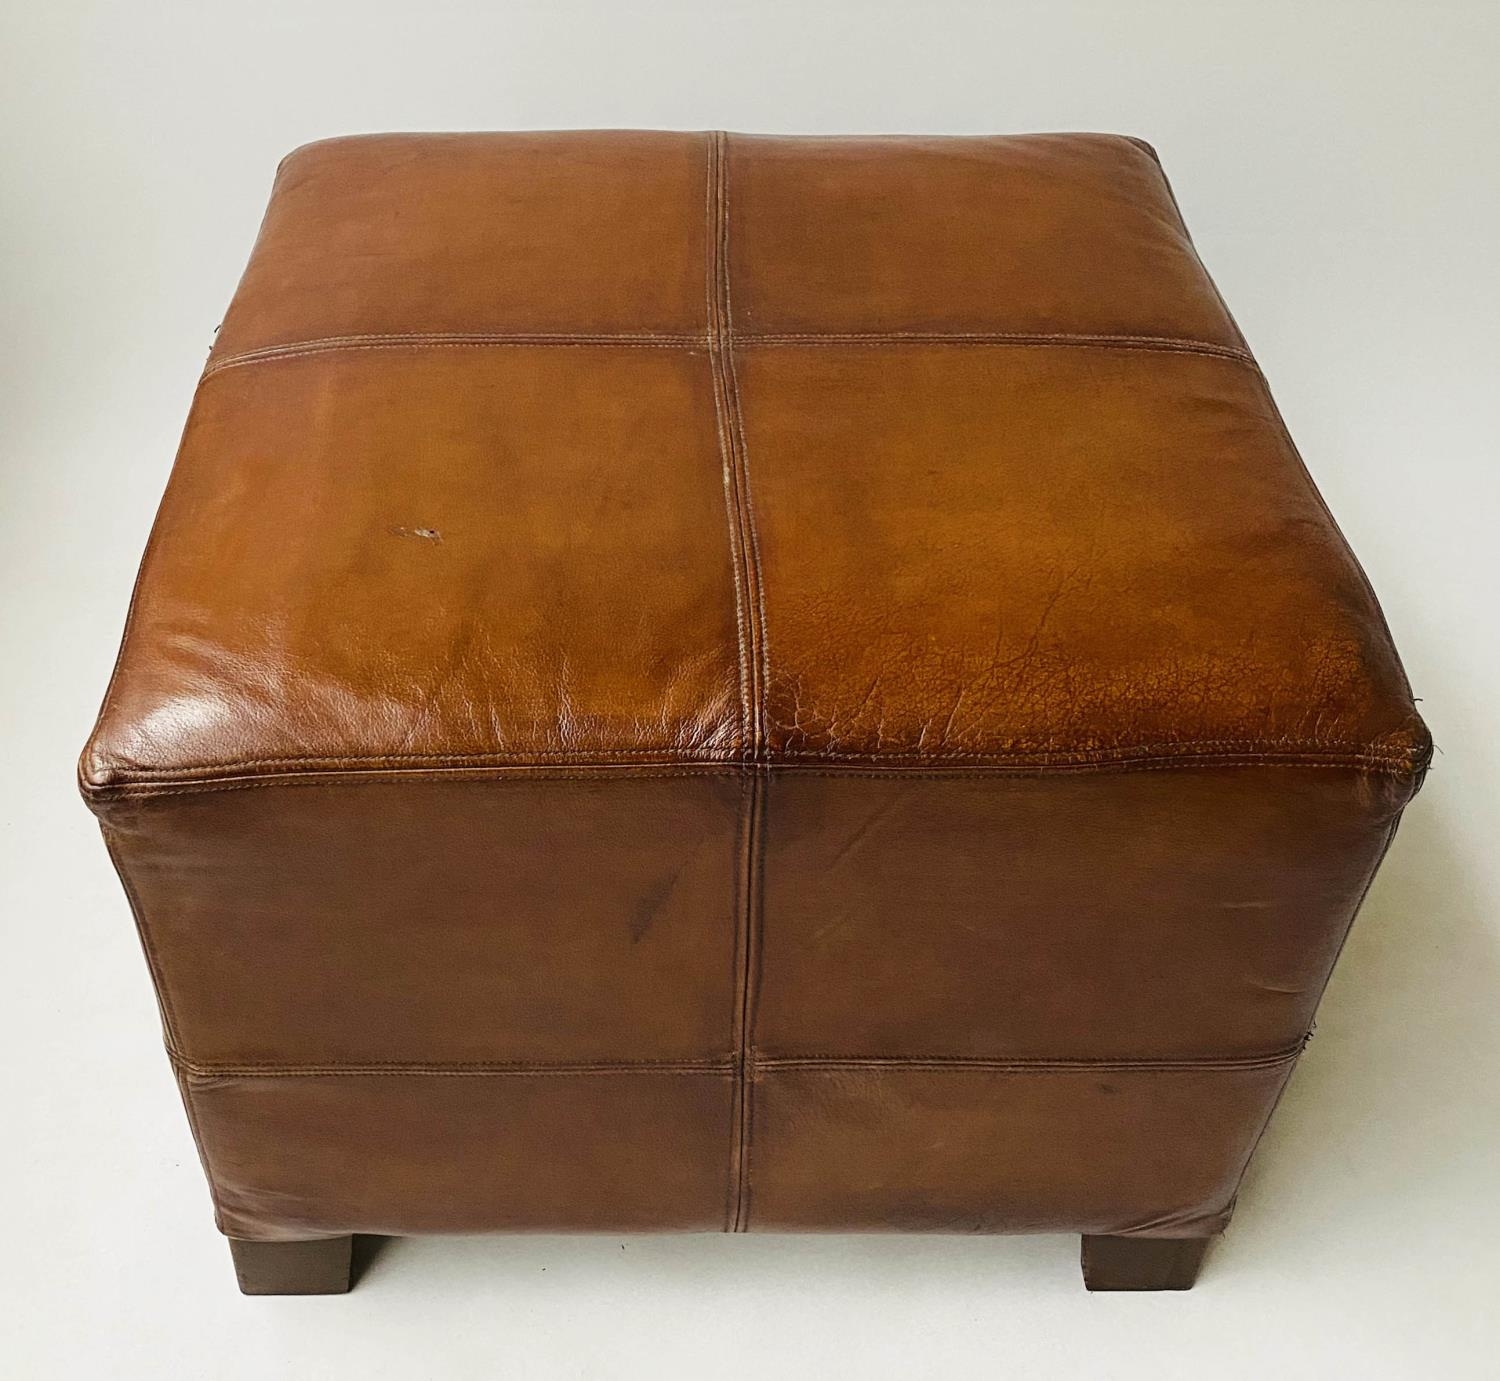 CENTRE STOOL, square stitched natural tan leather, 65cm x 65cm x 50cm H. - Image 6 of 6